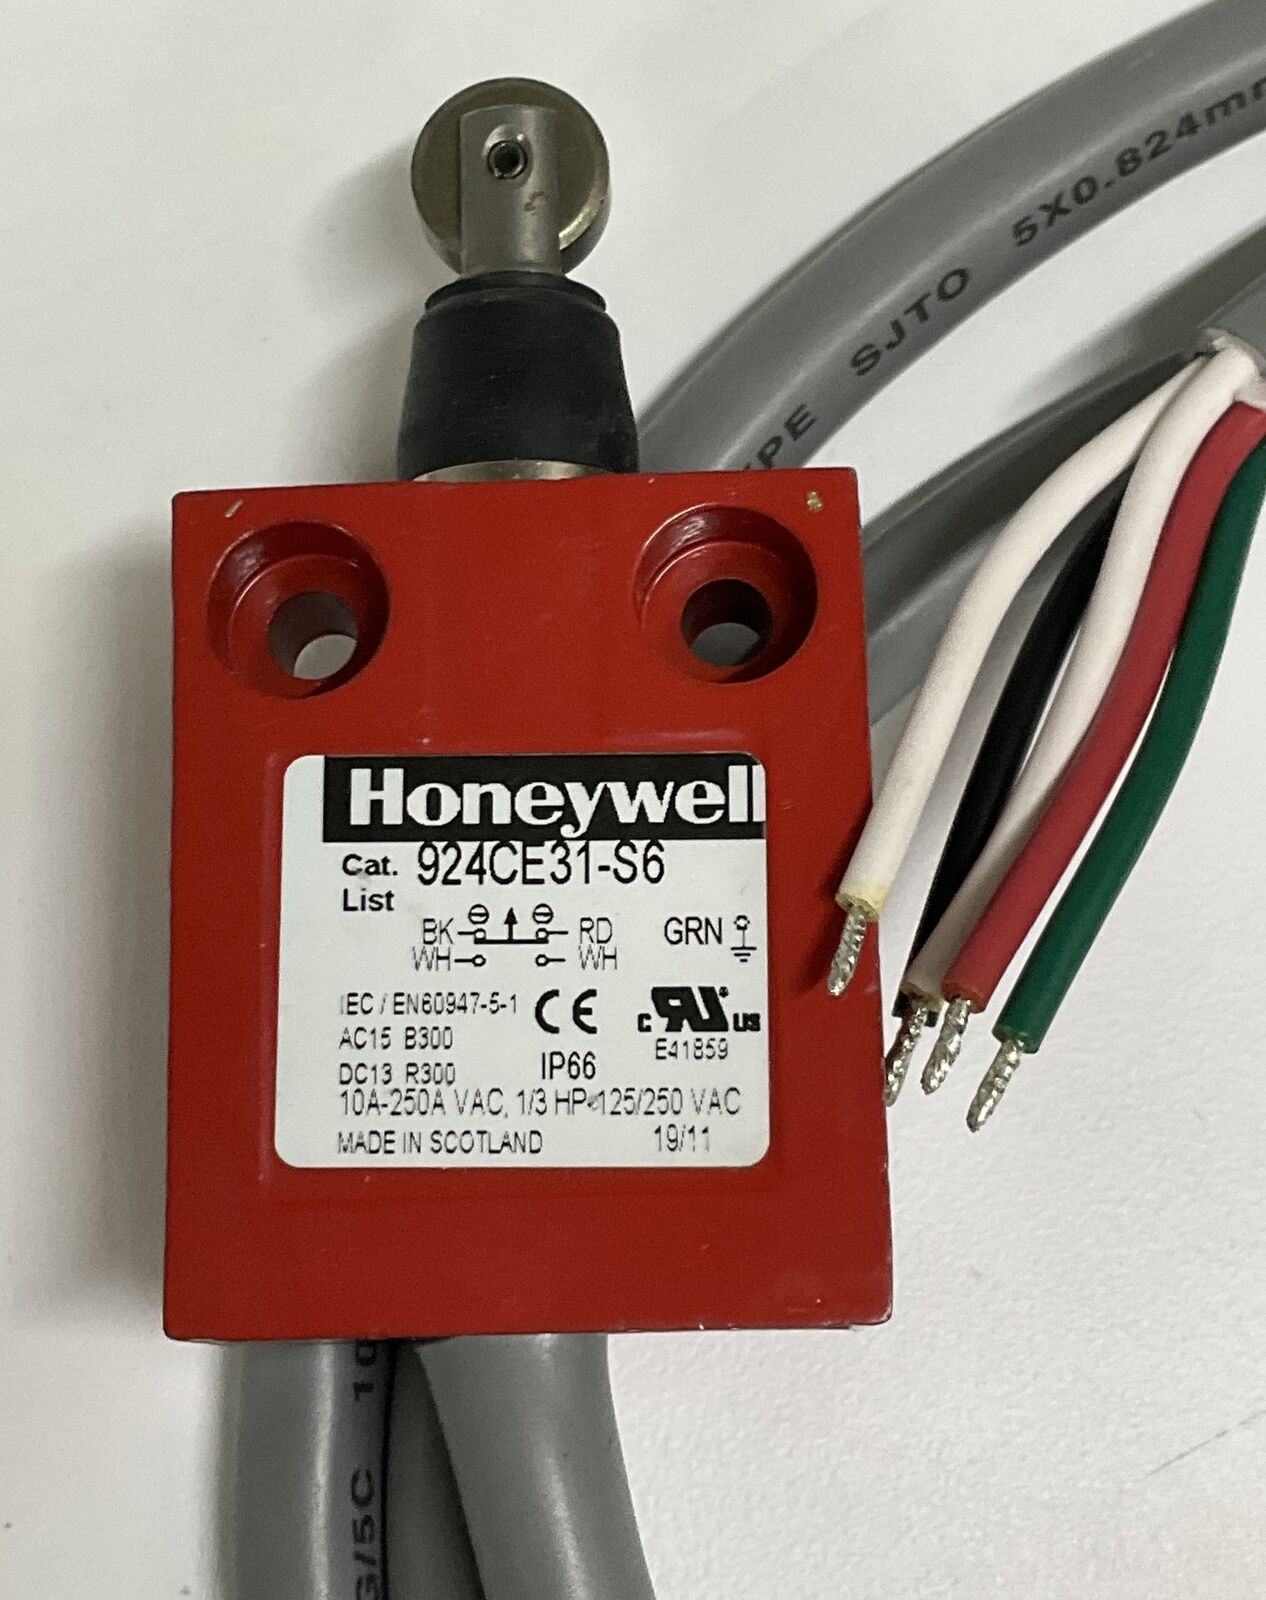 Honeywell 924CE31-S6 New SPDT 10A 250V Roller Snap Action Limit Switch (CBL107) - 0